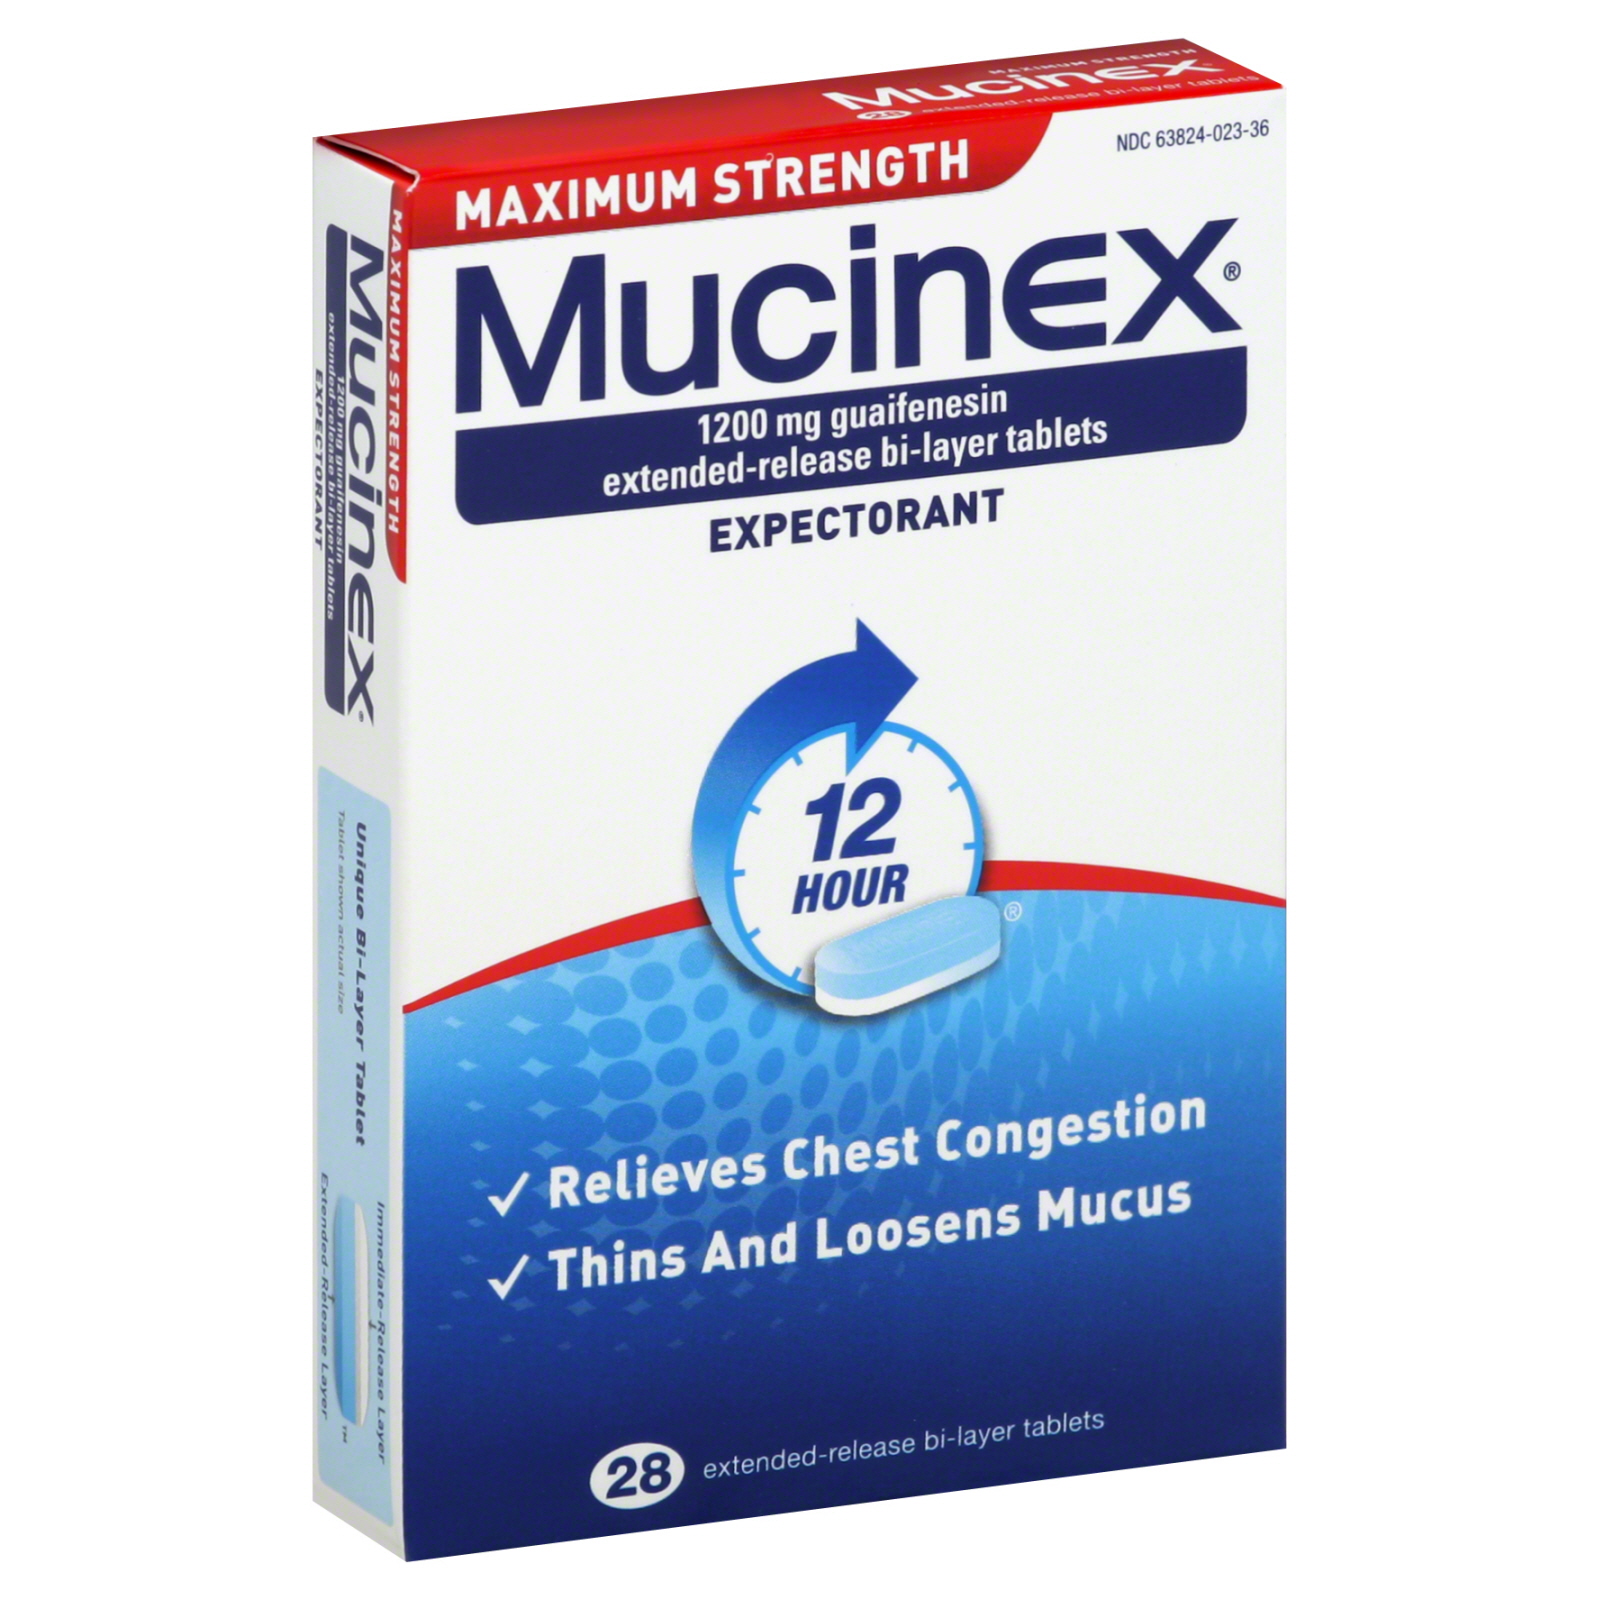 Mucinex Maximum Strength Extended-Release Bi-Layer Tablets 28 Ct